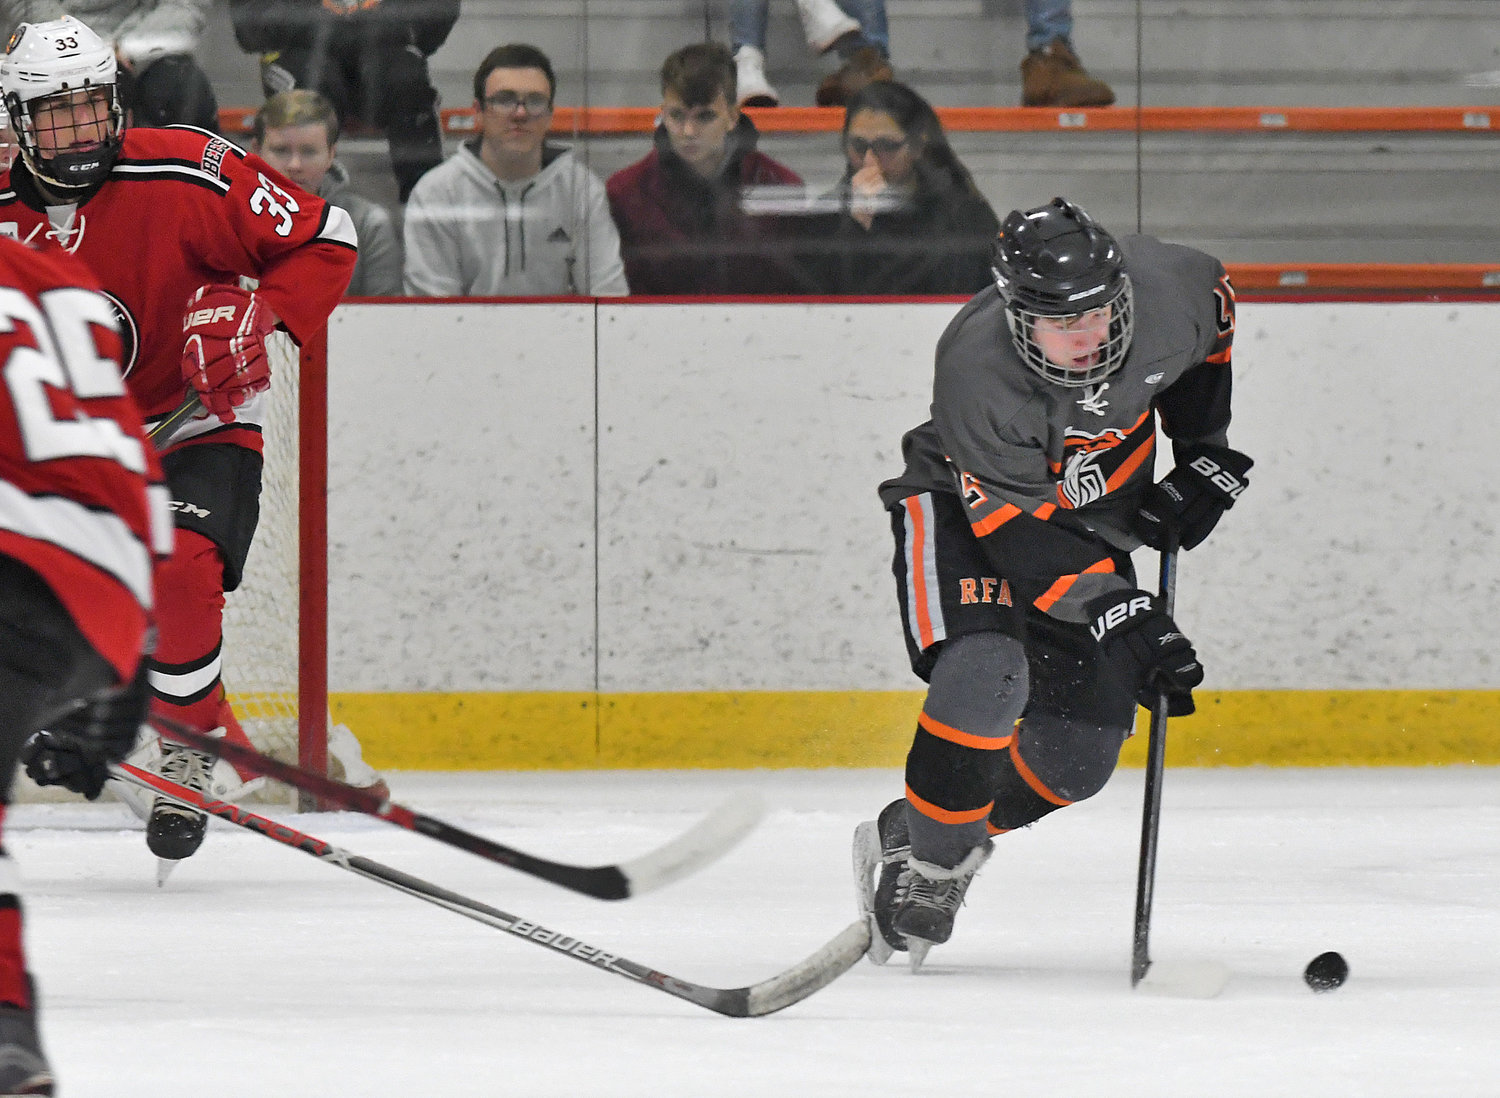 STRIKING FIRST — Rome Free Academy’s Eli Dormio grabs the puck in the Baldwinsville zone as defenseman Christian Treichler, 33,  closes in. Dormio wheeled around and scored the first RFA goal in Tuesday’s 4-1 win at Kennedy Arena.